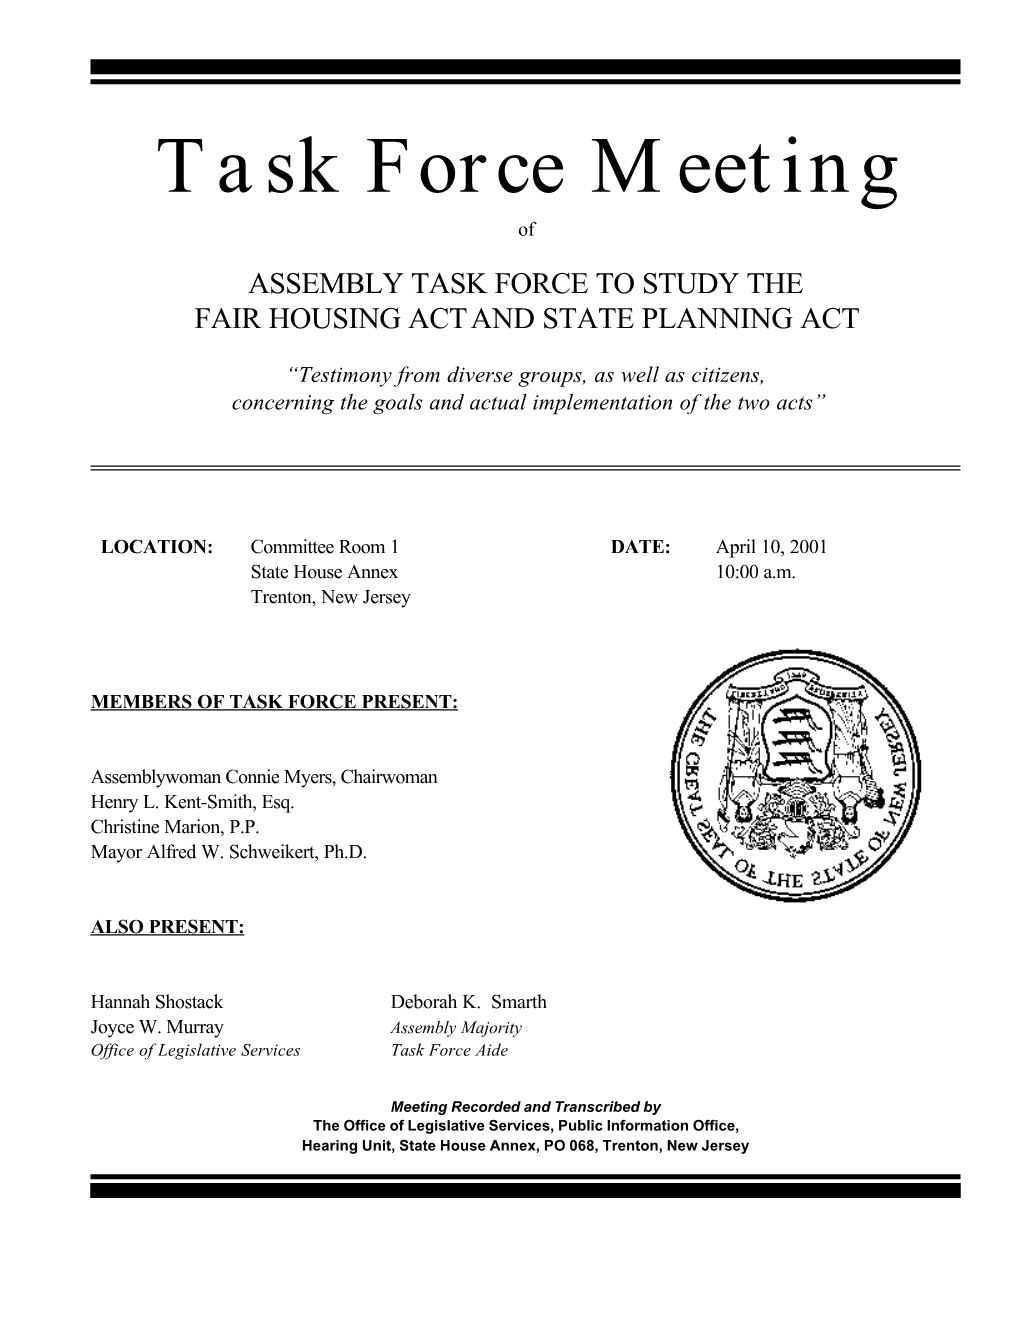 Task Force Meeting of ASSEMBLY TASK FORCE to STUDY the FAIR HOUSING ACT and STATE PLANNING ACT